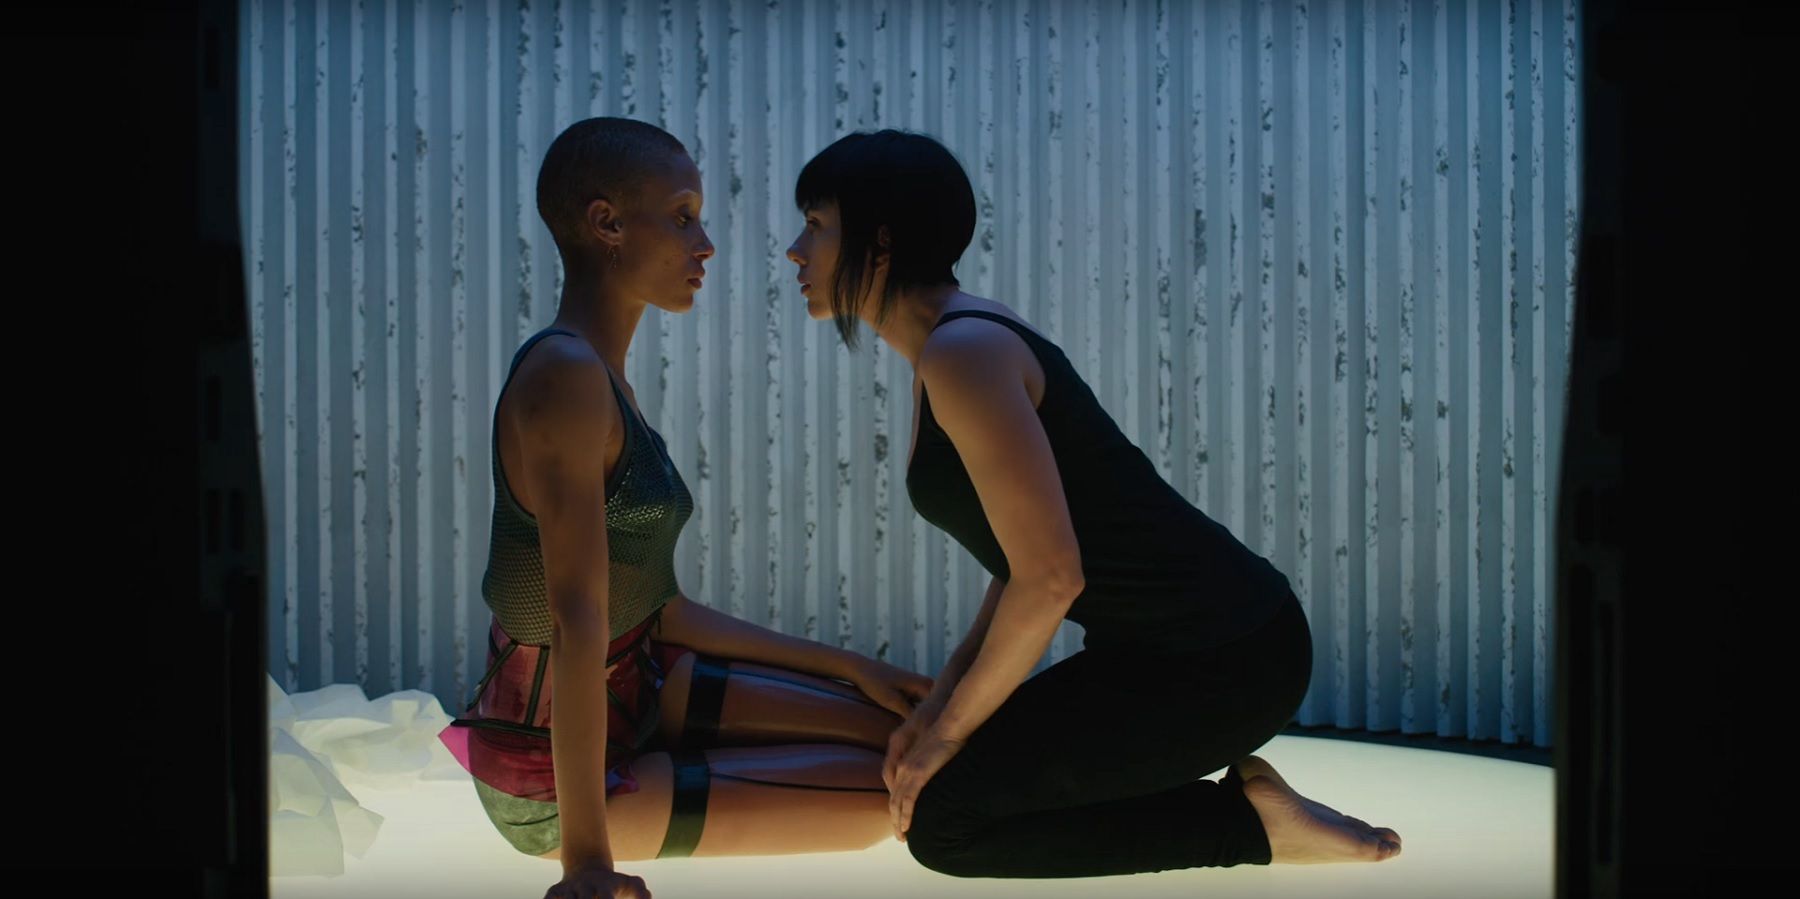 Ghost in the Shell Trailer - Major meets robot prostitute